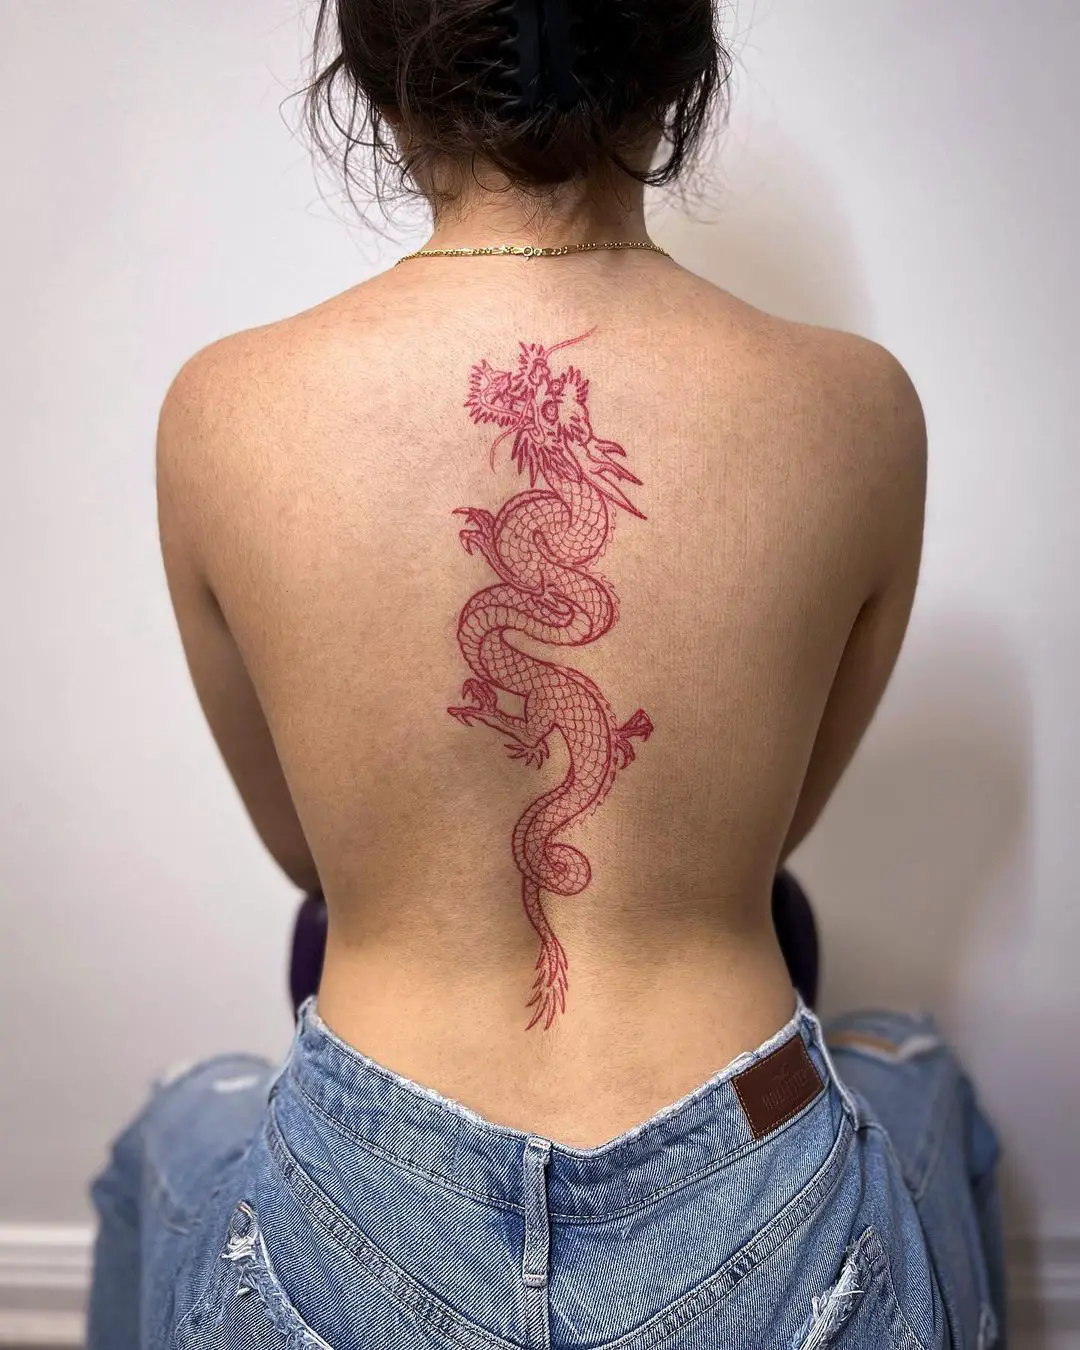 16 Dragon Spine Tattoo For Woman - Inspired Beauty